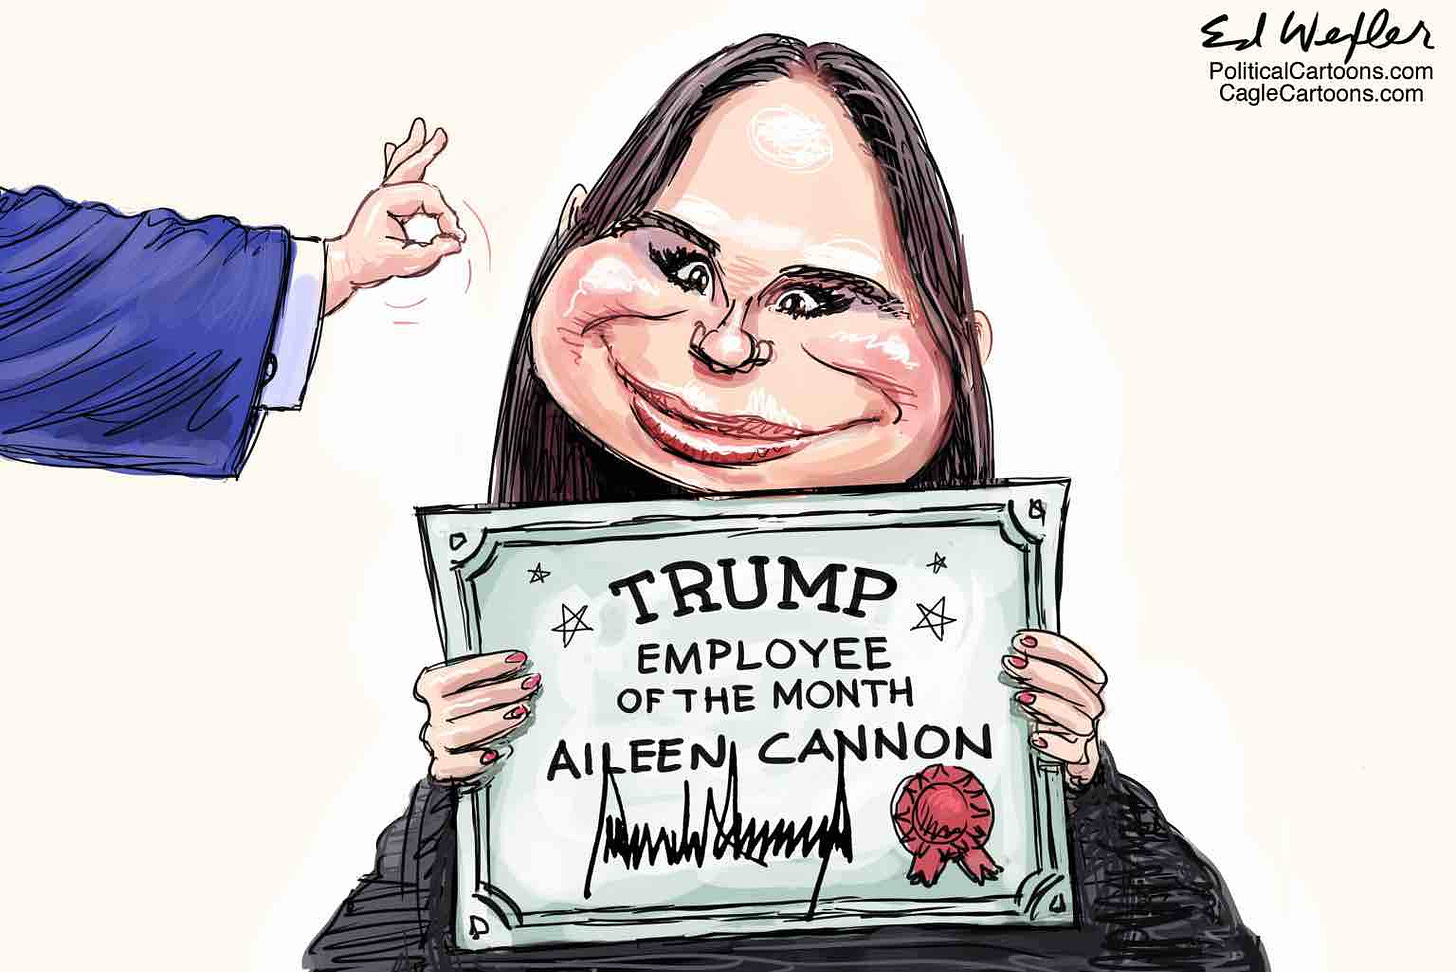 Trump appointed Aileen Cannon after losing the electio.